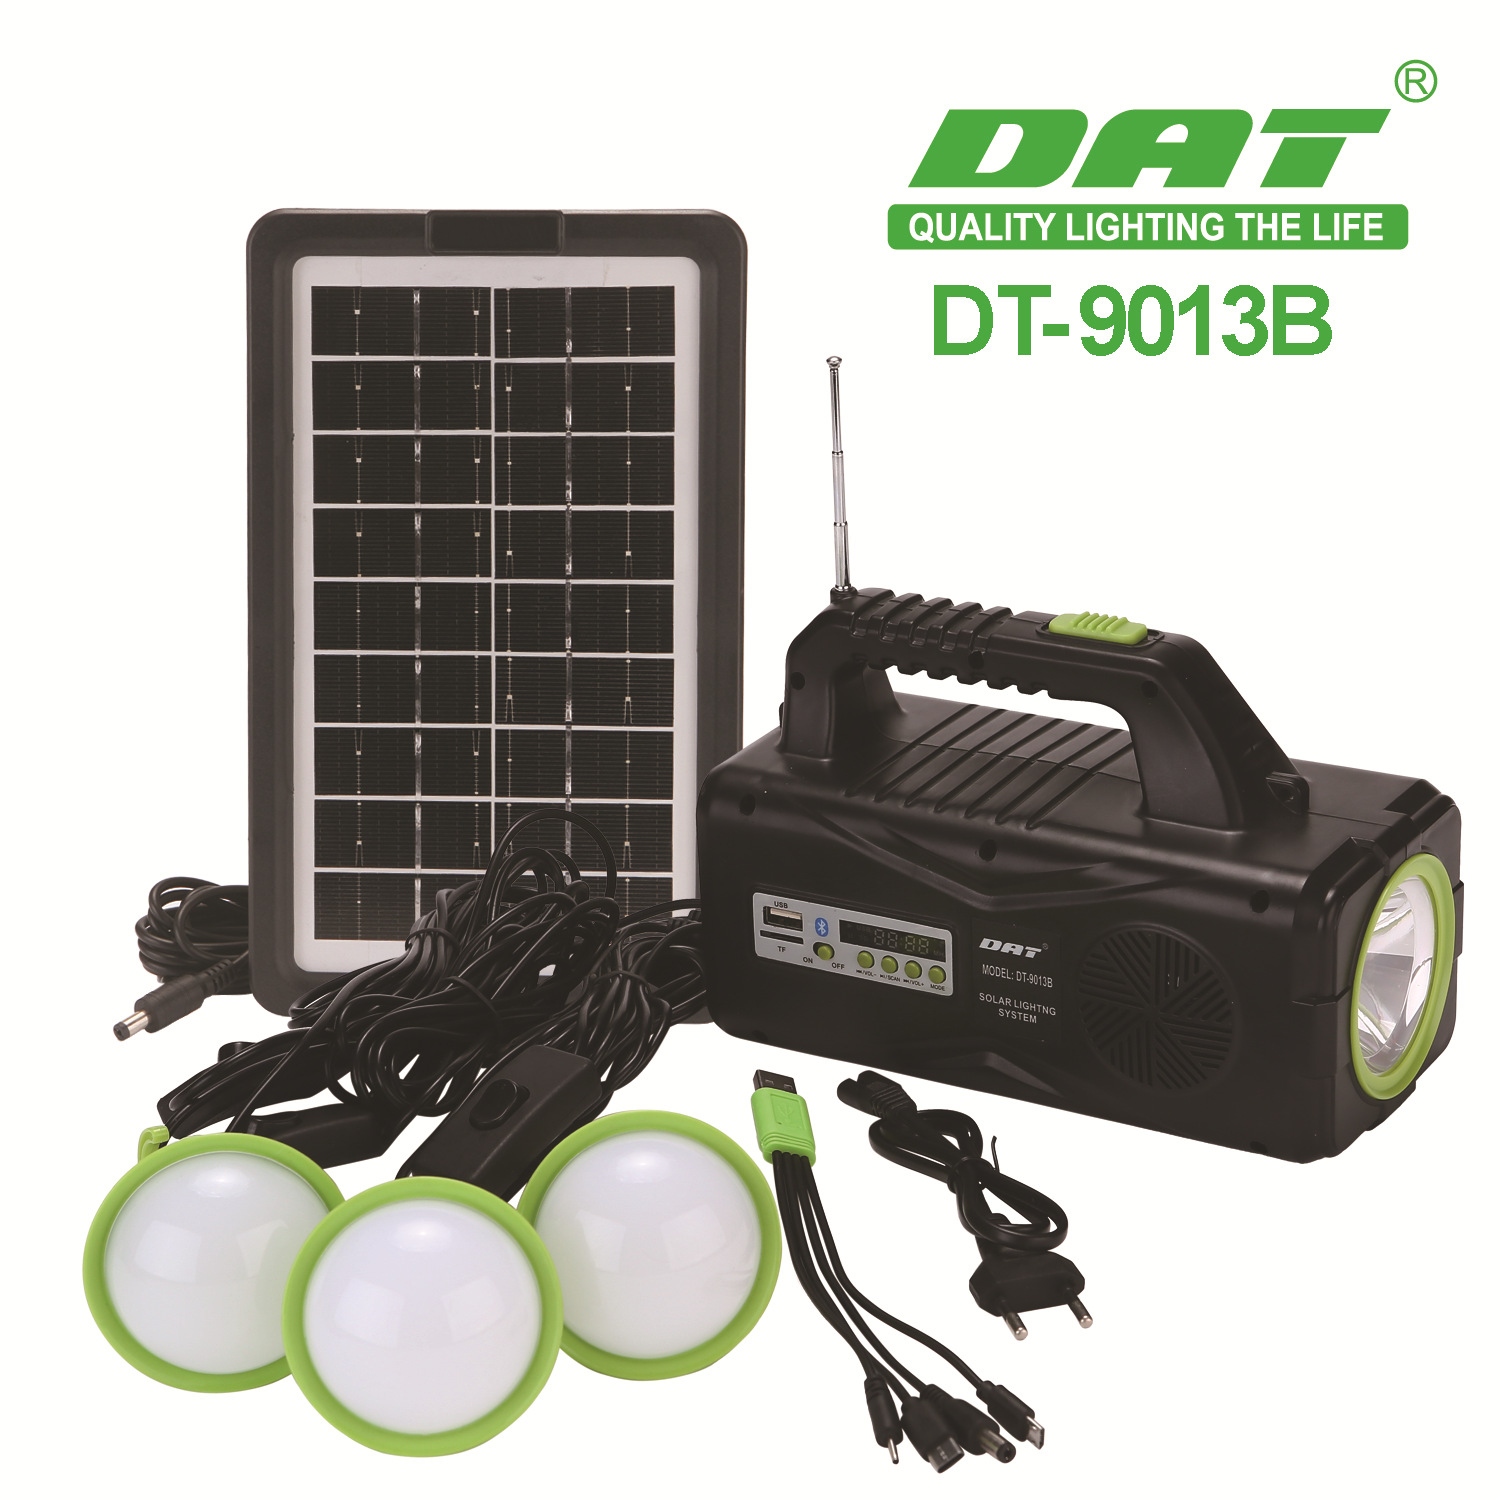 Dt-9013b Outdoor Camping Light Solar Lighting System Rechargeable with Bluetooth Mp3 Radio Function